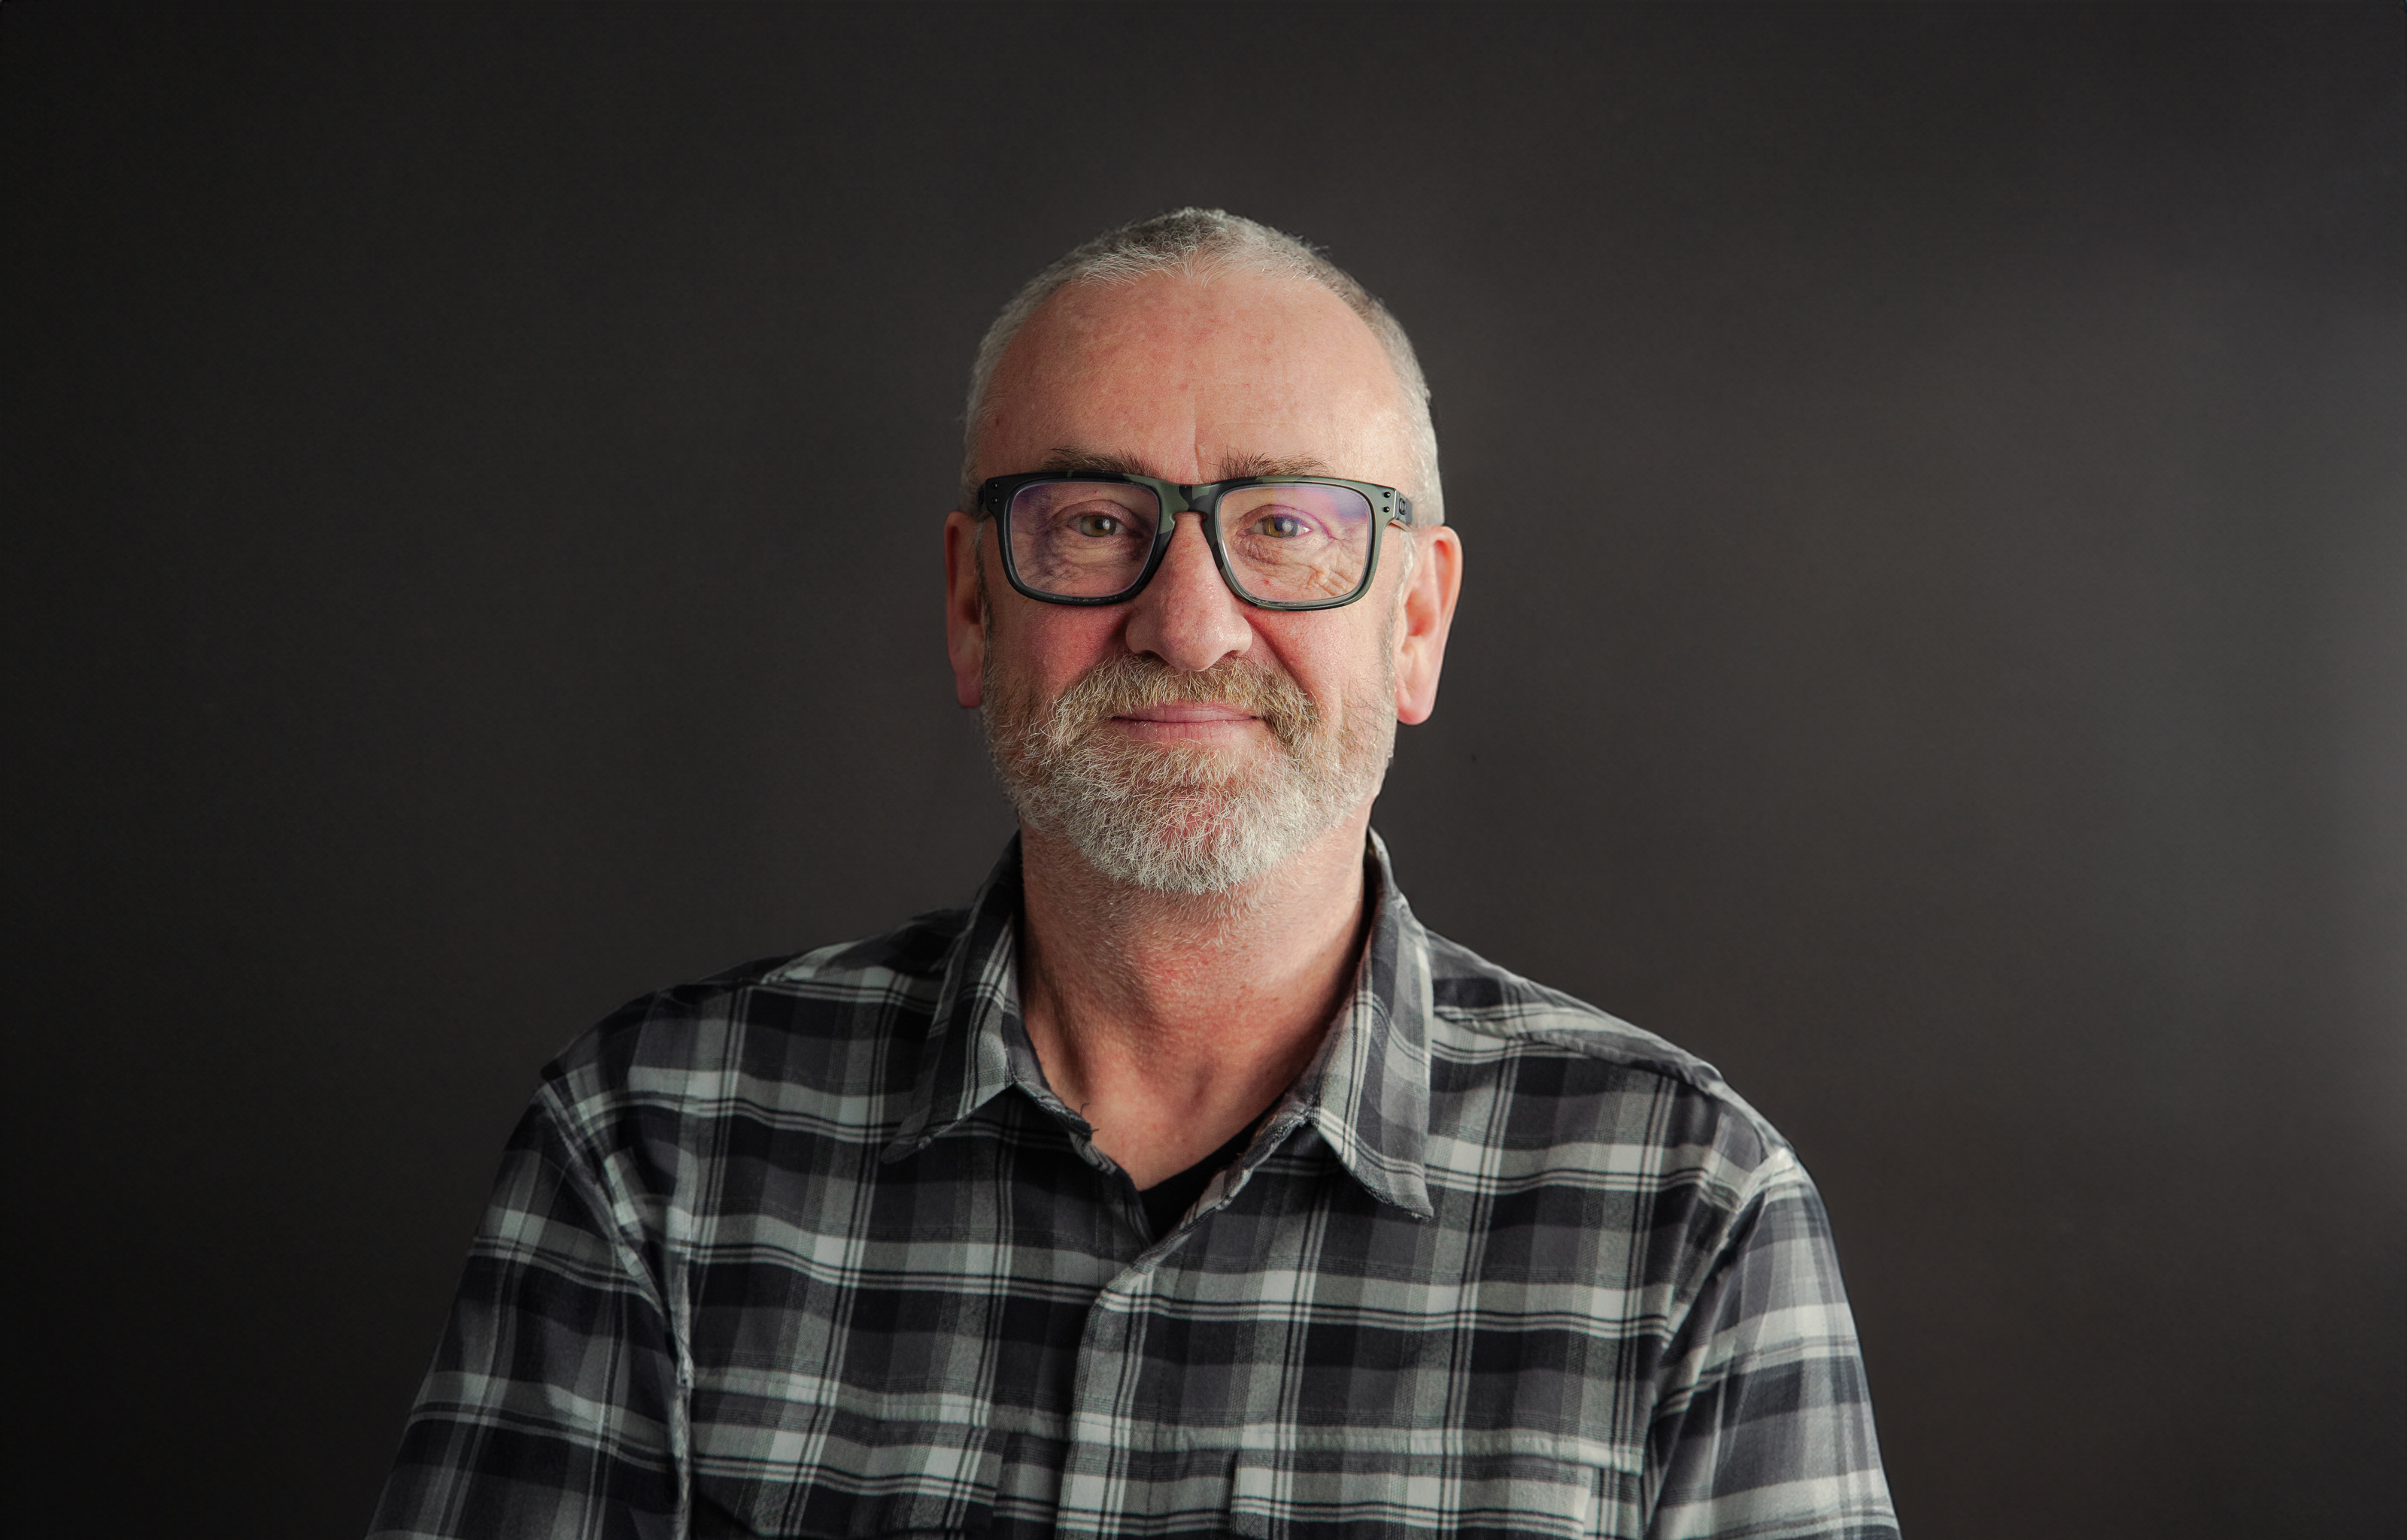 B.E. Meyers & Co. Welcomes Dave Roberts as Creative Director of Marketing